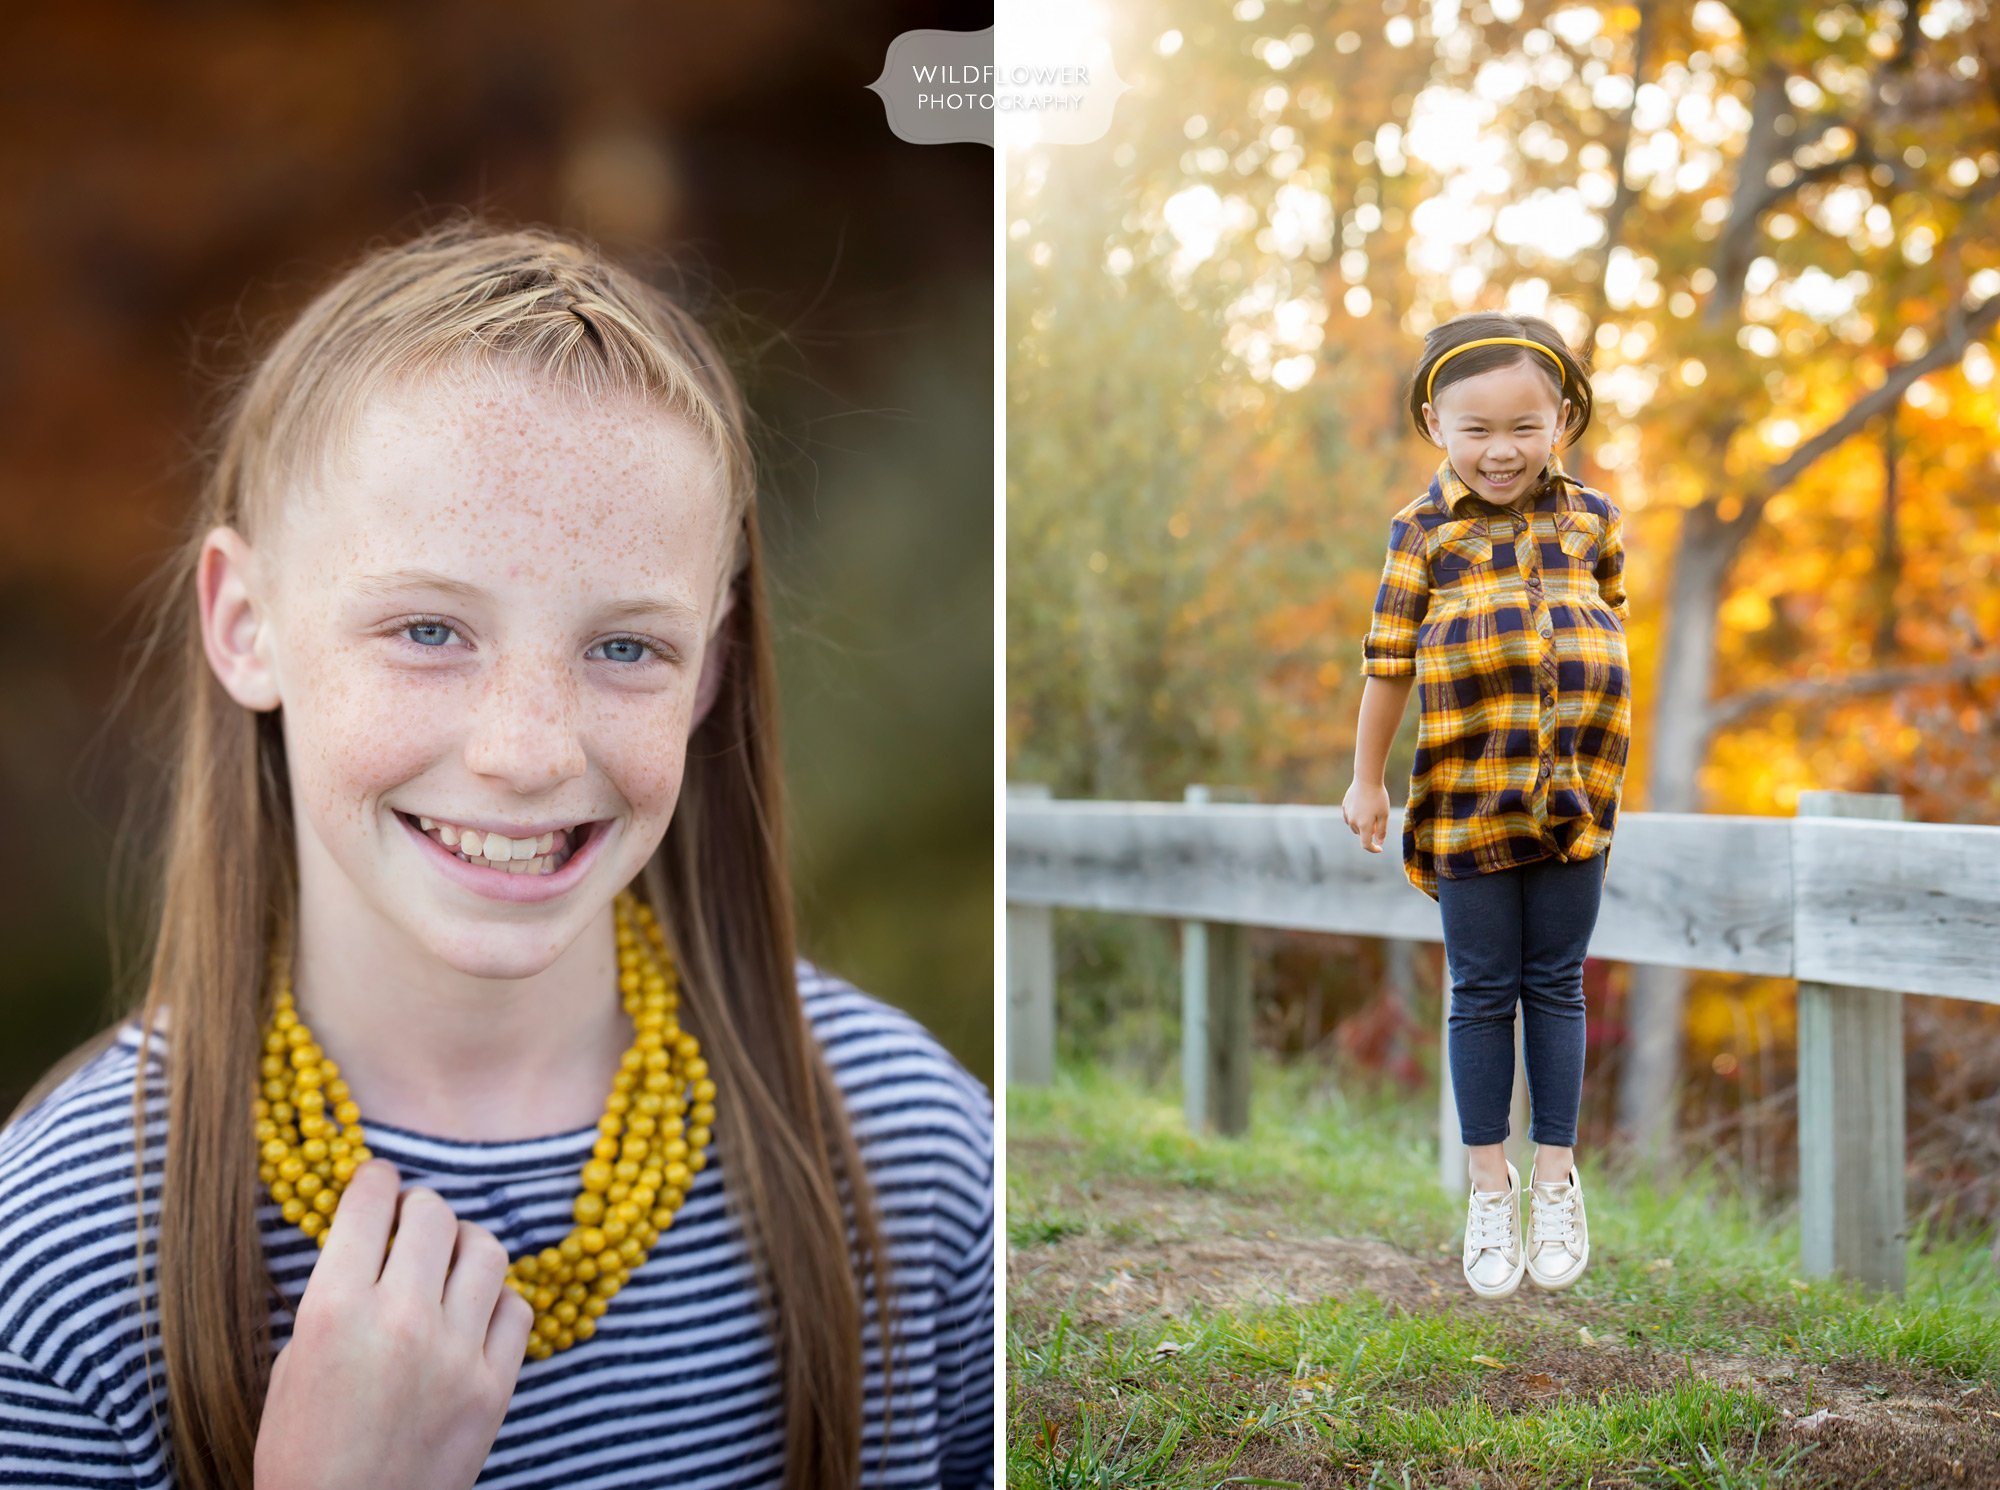 Fun family photographer in Columbia, MO for this October fall session.